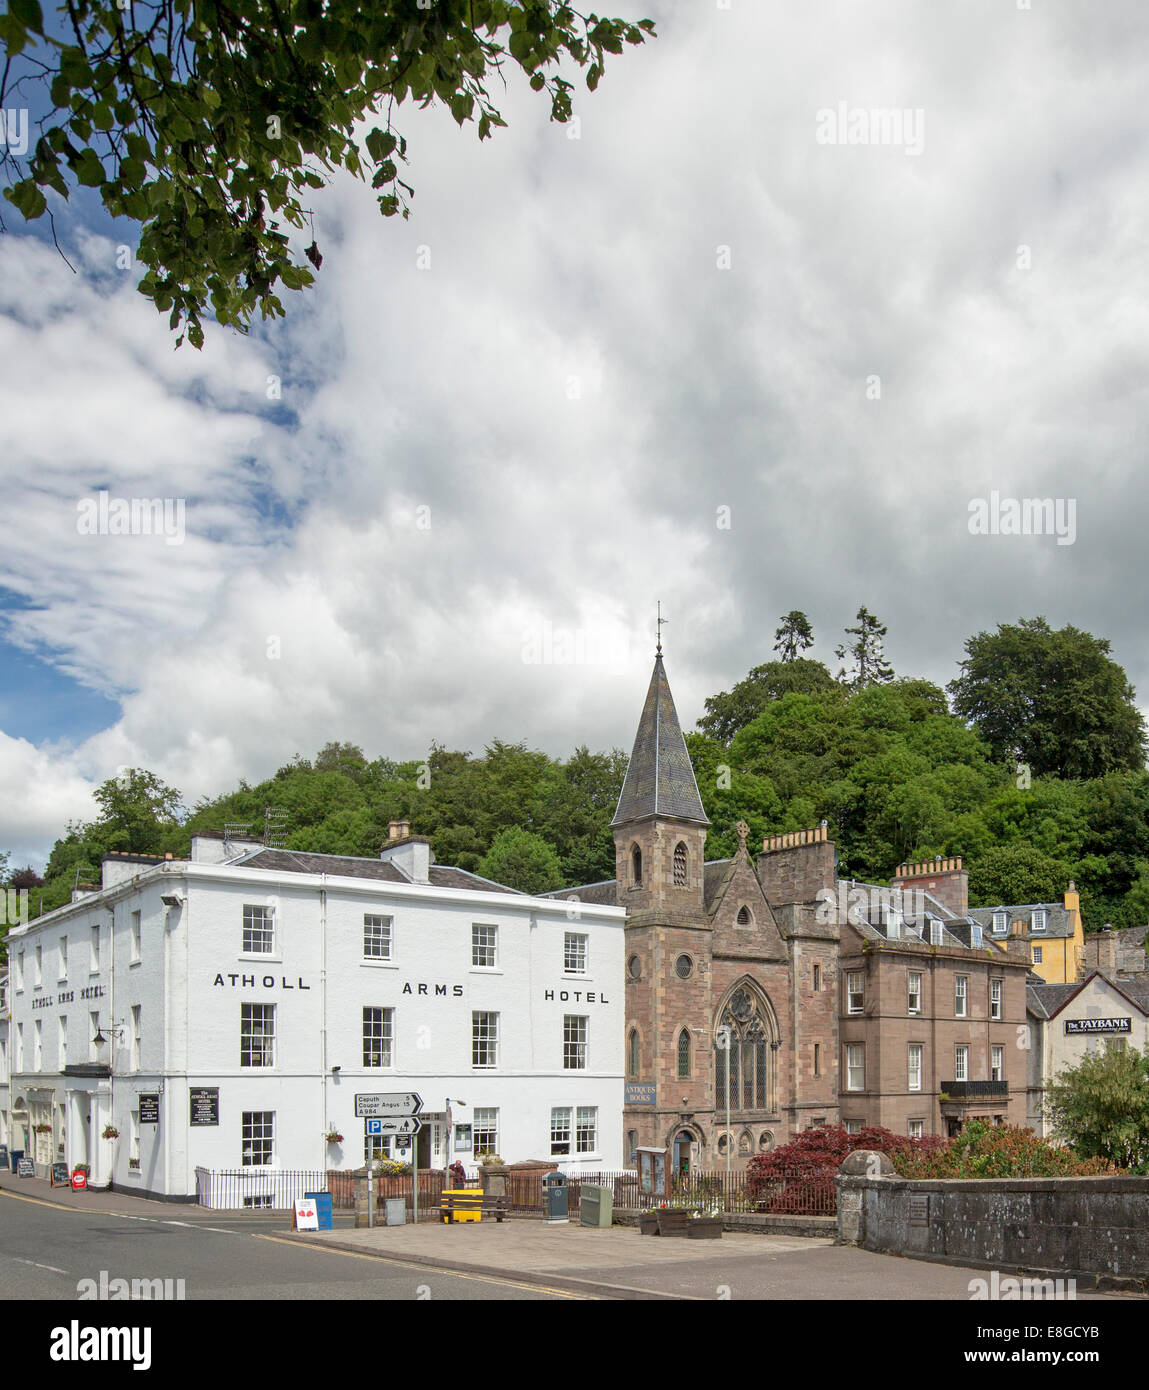 Main street buildings, including historic 19th century Atholl Arms Hotel and old church in Scottish town of Dunkeld Stock Photo